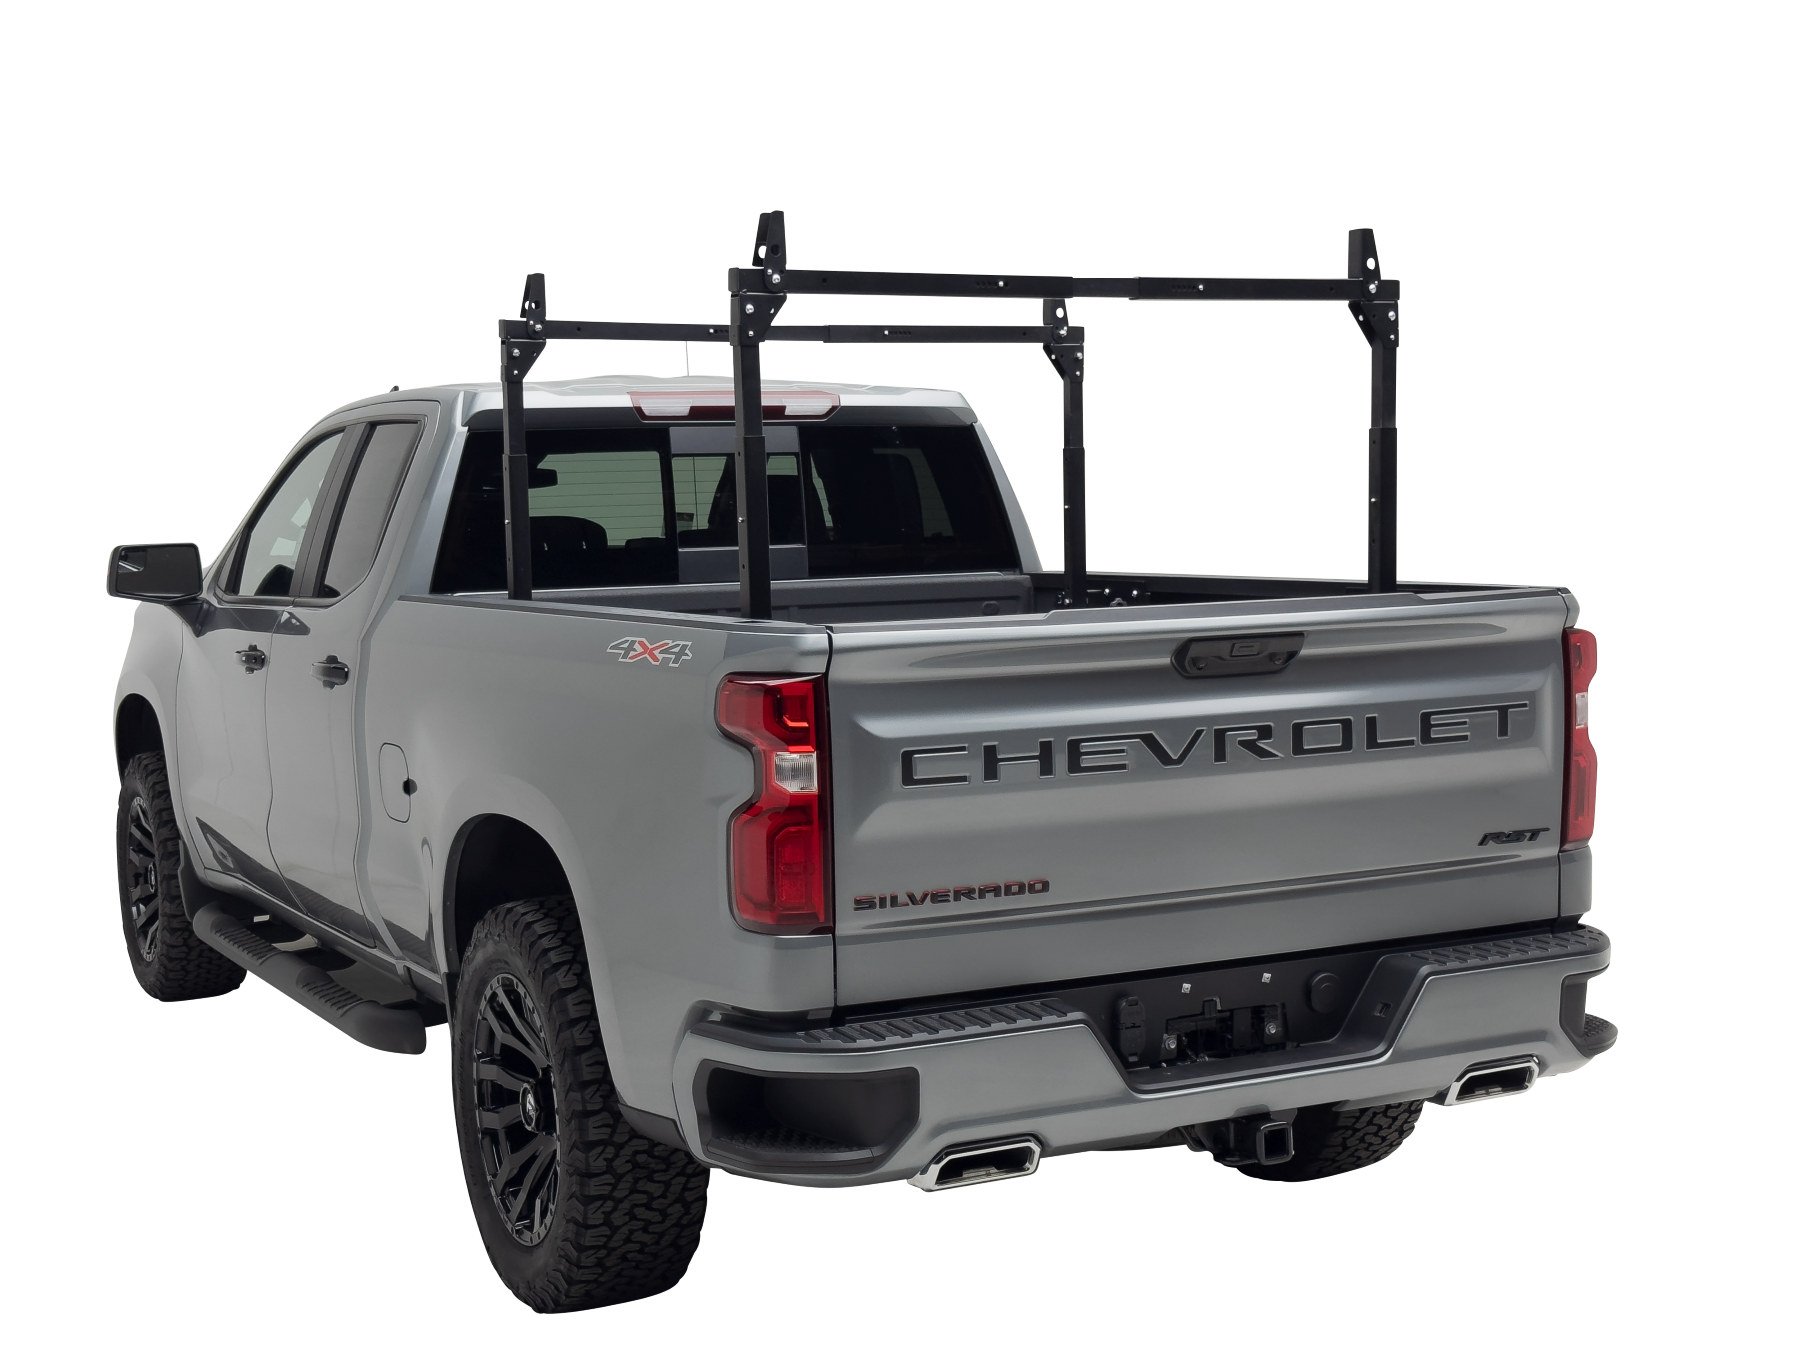 Universal Hidden Bed Rack for Standard and Long Bed Trucks, 2 Sets, (2) Left- (2) Right - Part # 84810211